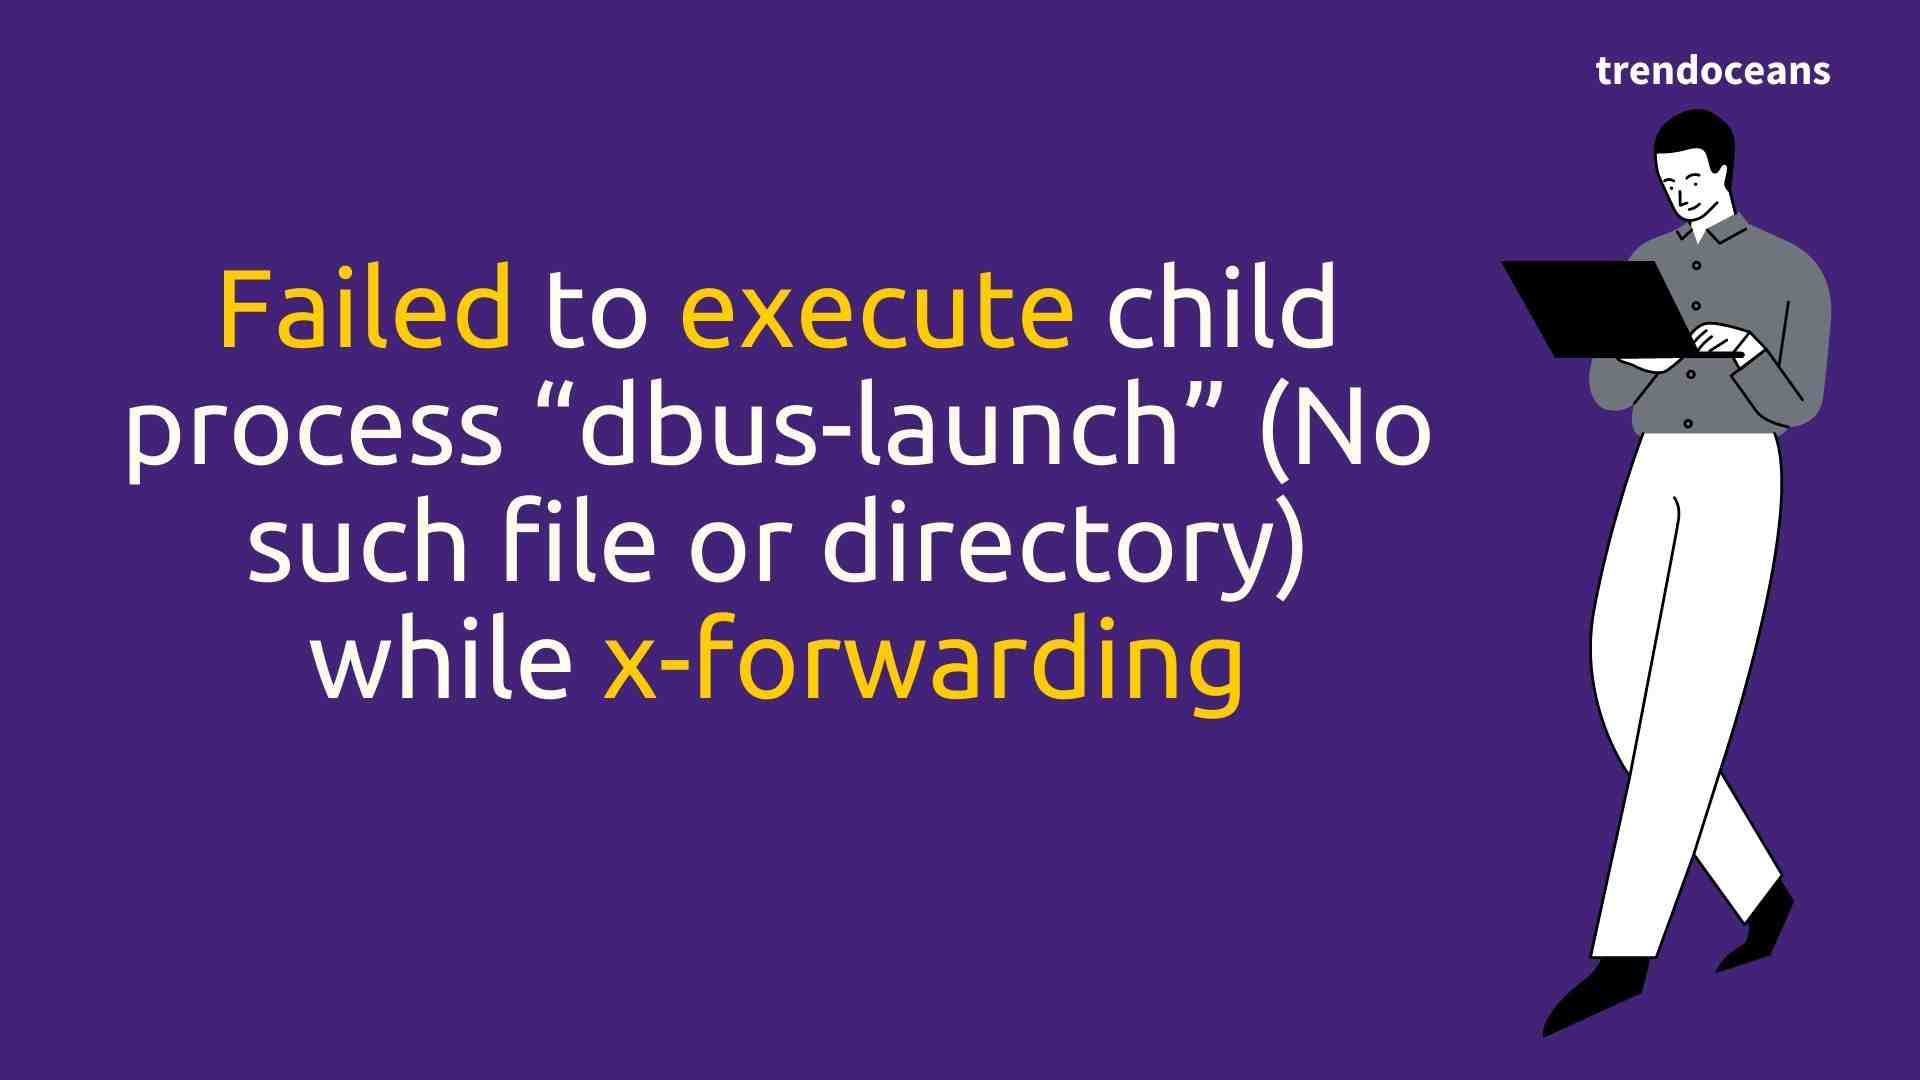 Failed to execute child process “dbus-launch” (No such file or directory) while x-forwarding